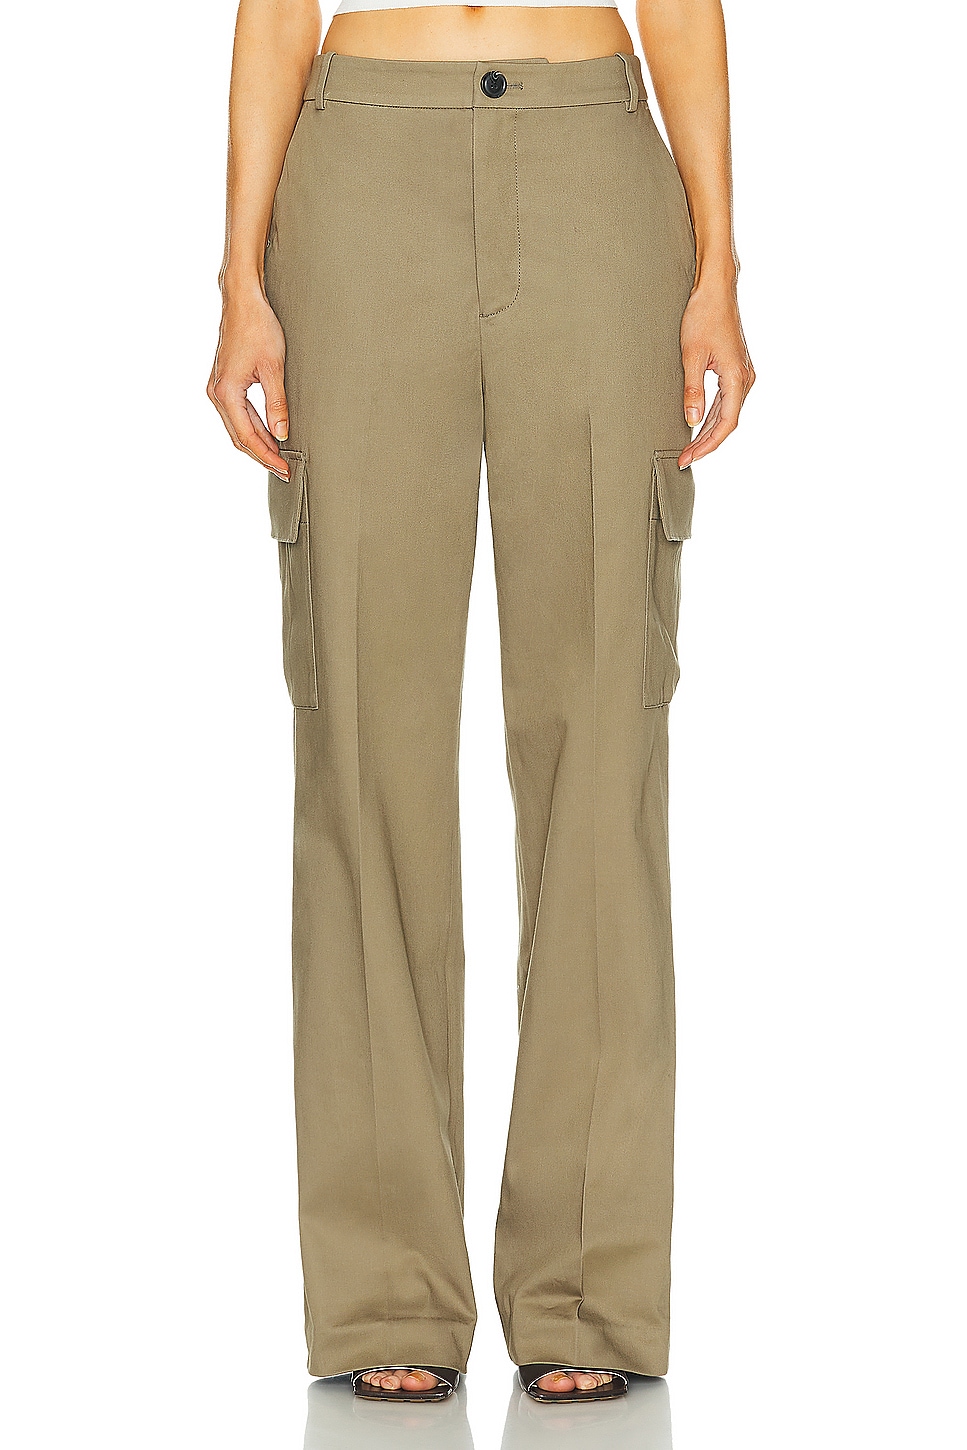 Image 1 of L'Academie by Marianna Bellamy Pant in Olive Green